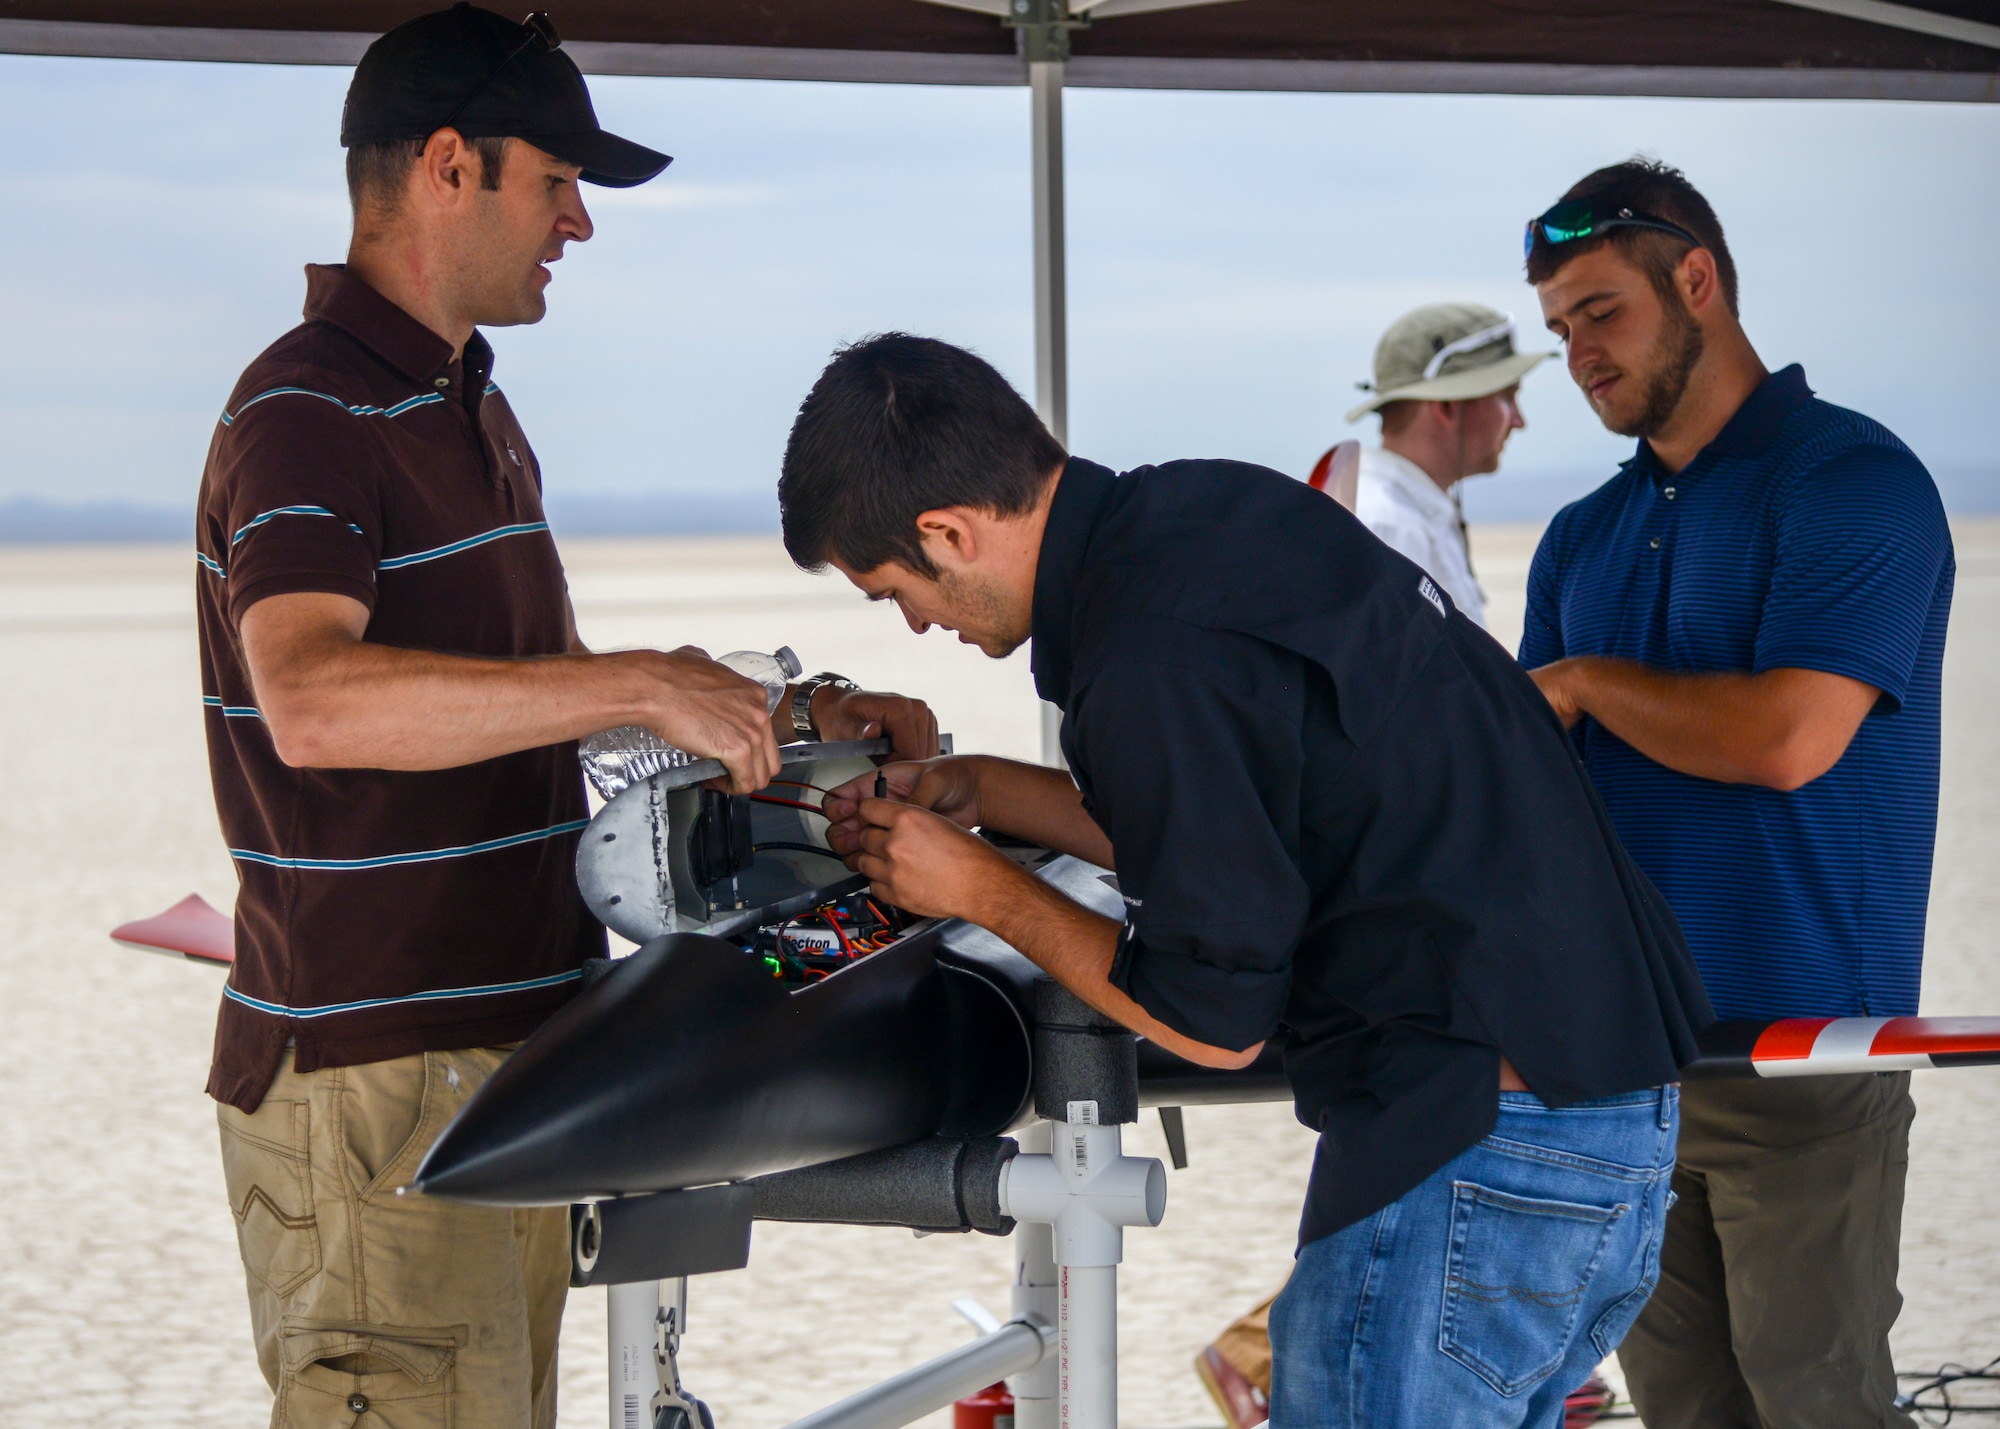 Engineers prepare an unmanned jet-powered aircraft for a flight test at Edwards Air Force Base, Calif., July 25. The flight tested a software suite called TACE, Testing Autonomy in a Complex Environment, developed by John Hopkins Applied Physics Lab. (U.S. Air Force photo by Giancarlo Casem)